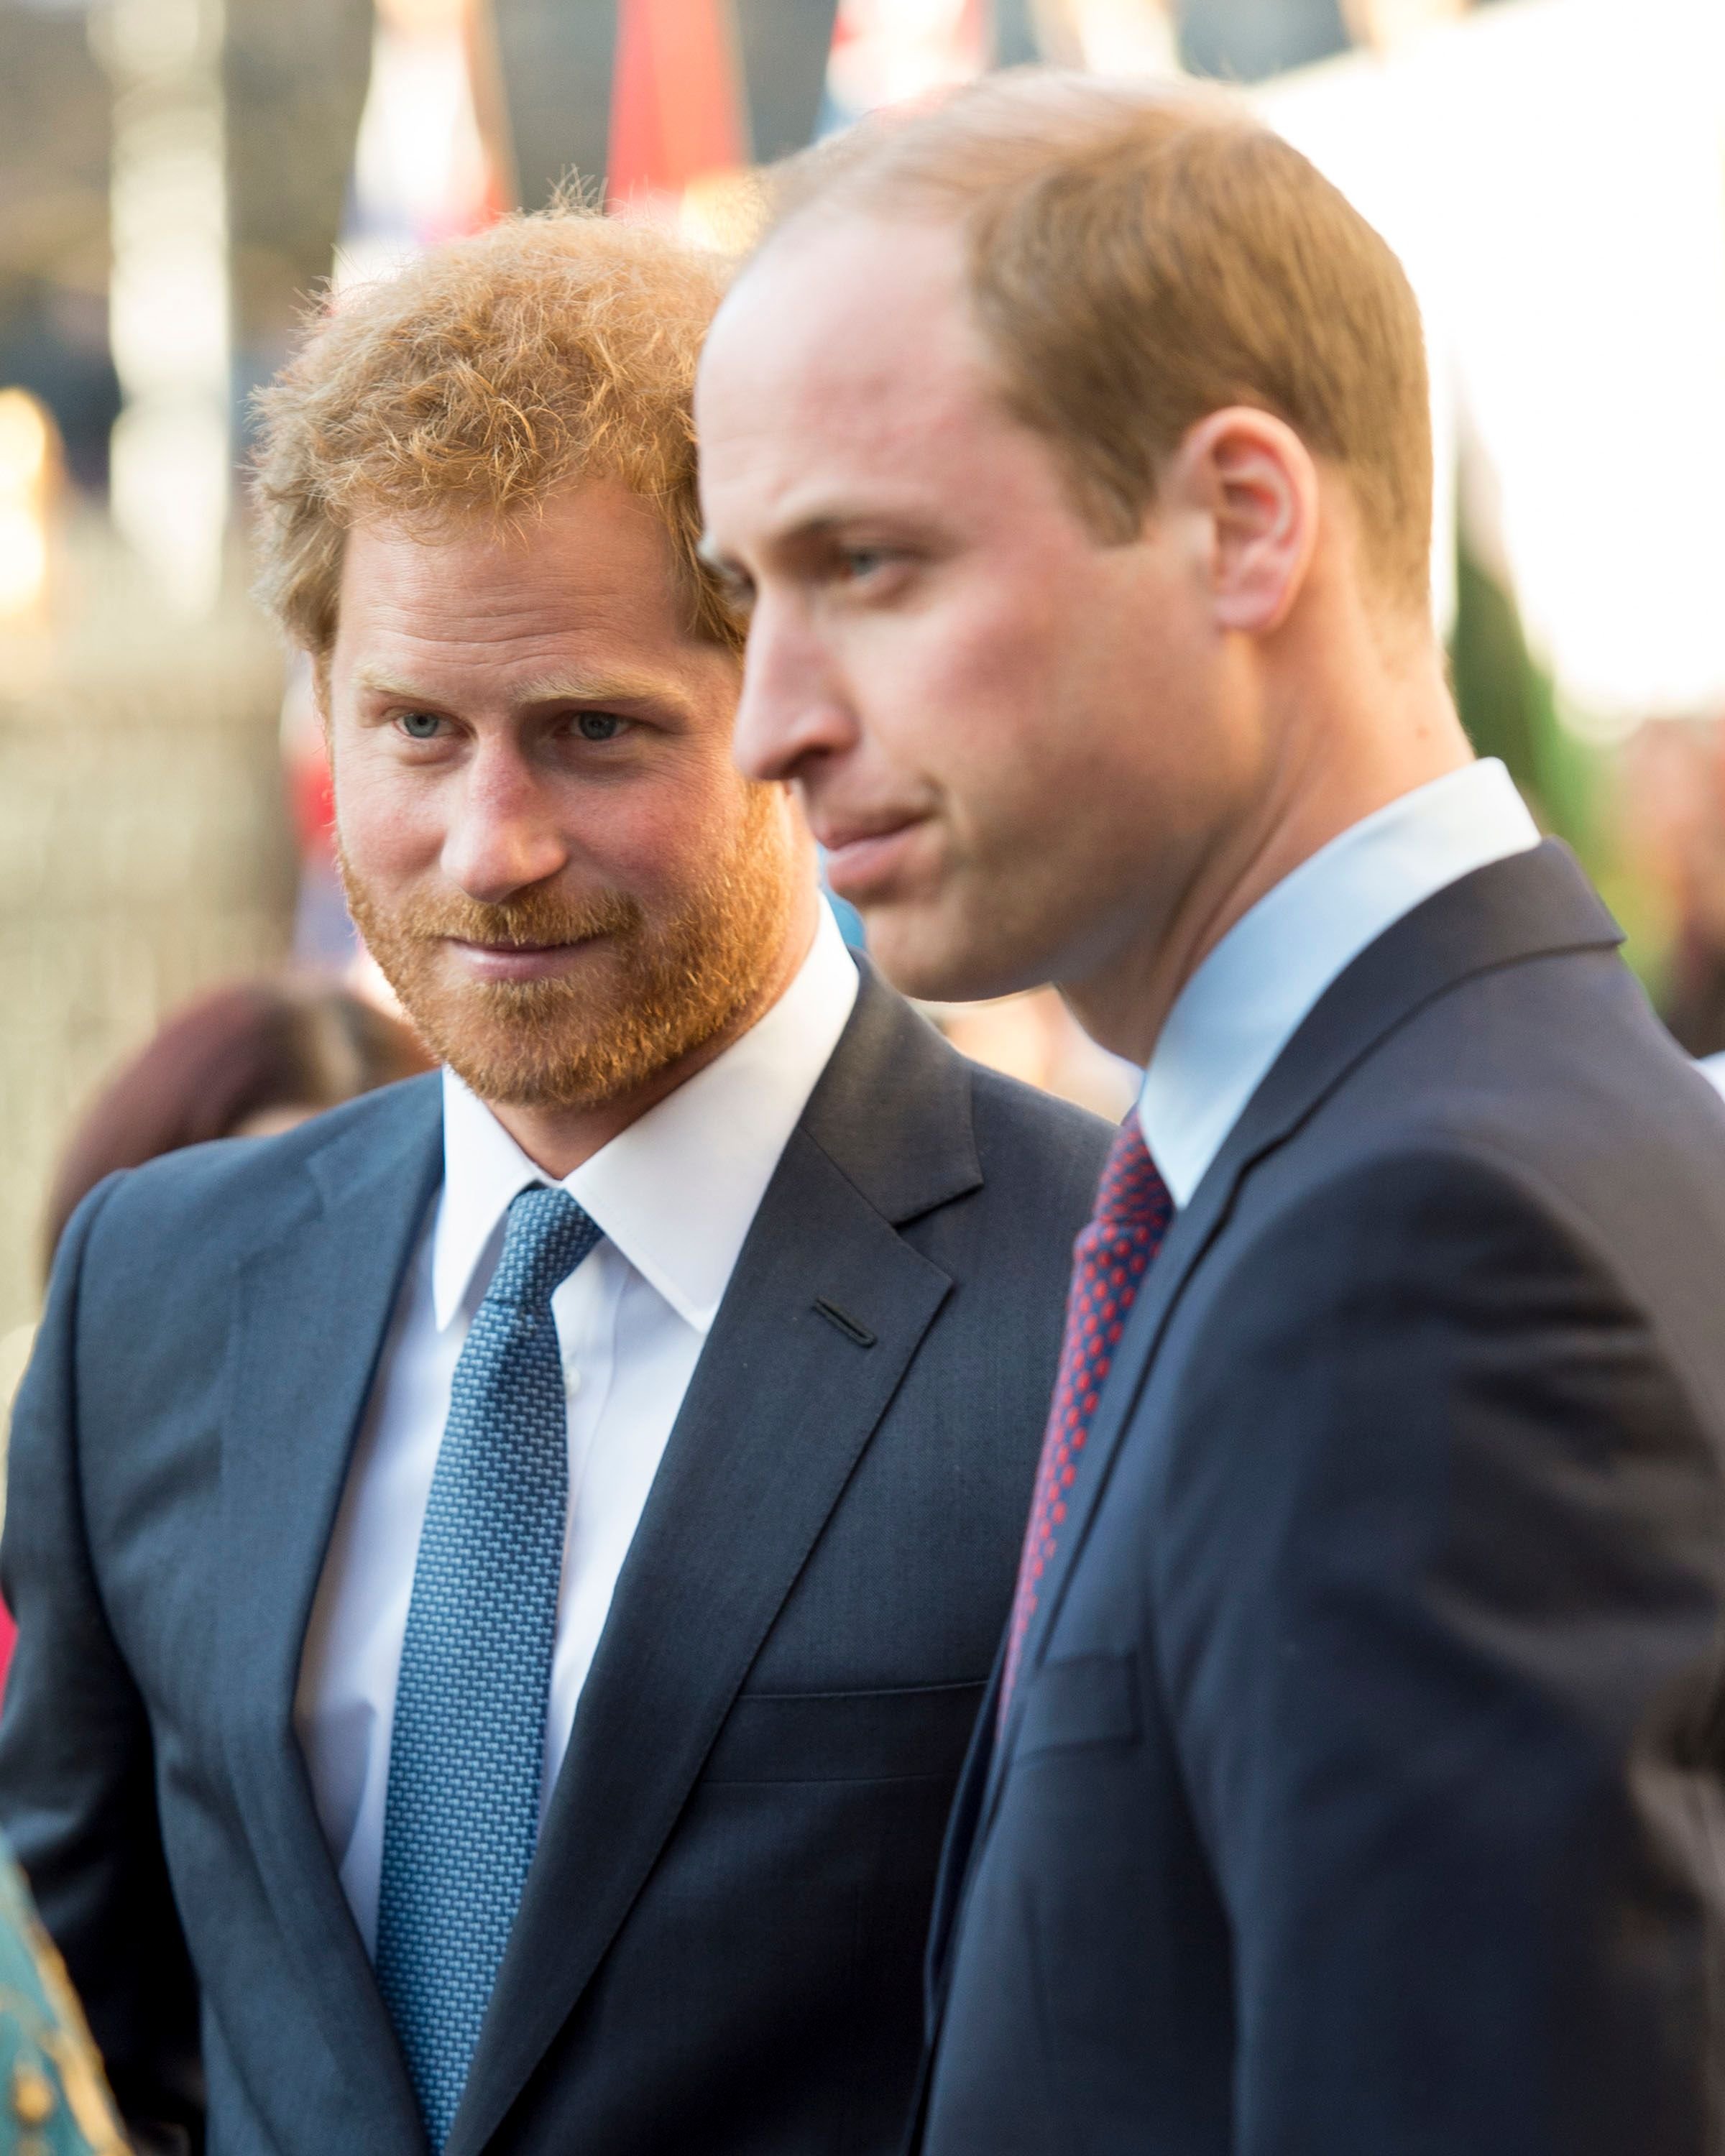 Prince Harry and Prince William at the Commonwealth Observance Day Service on March 14, 2016 | Getty Images